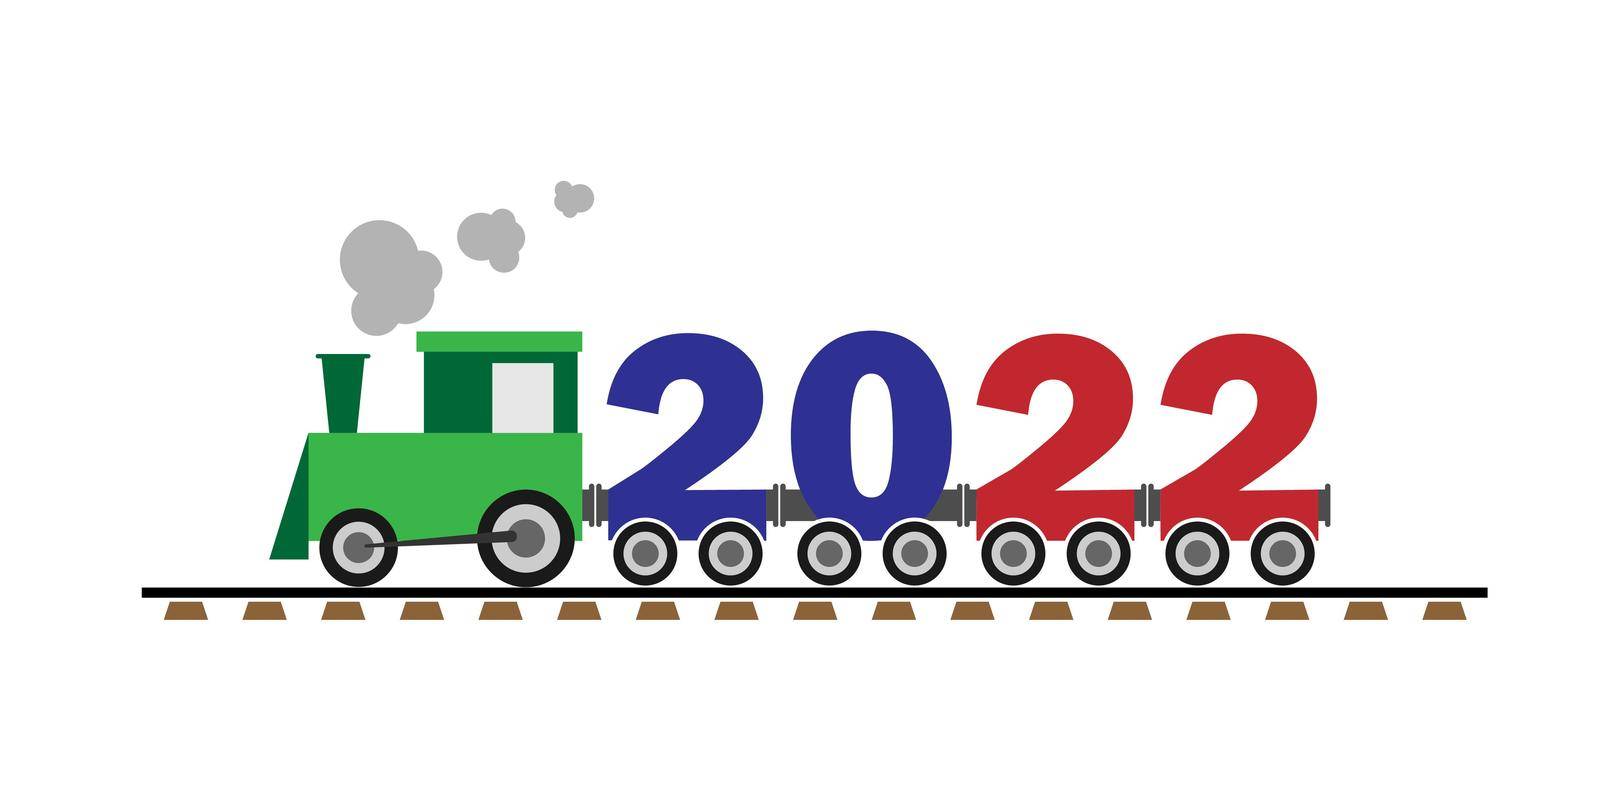 Children's train from the car in the form of numbers 2022. Merry Christmas and Happy New Year. Vector illustration.